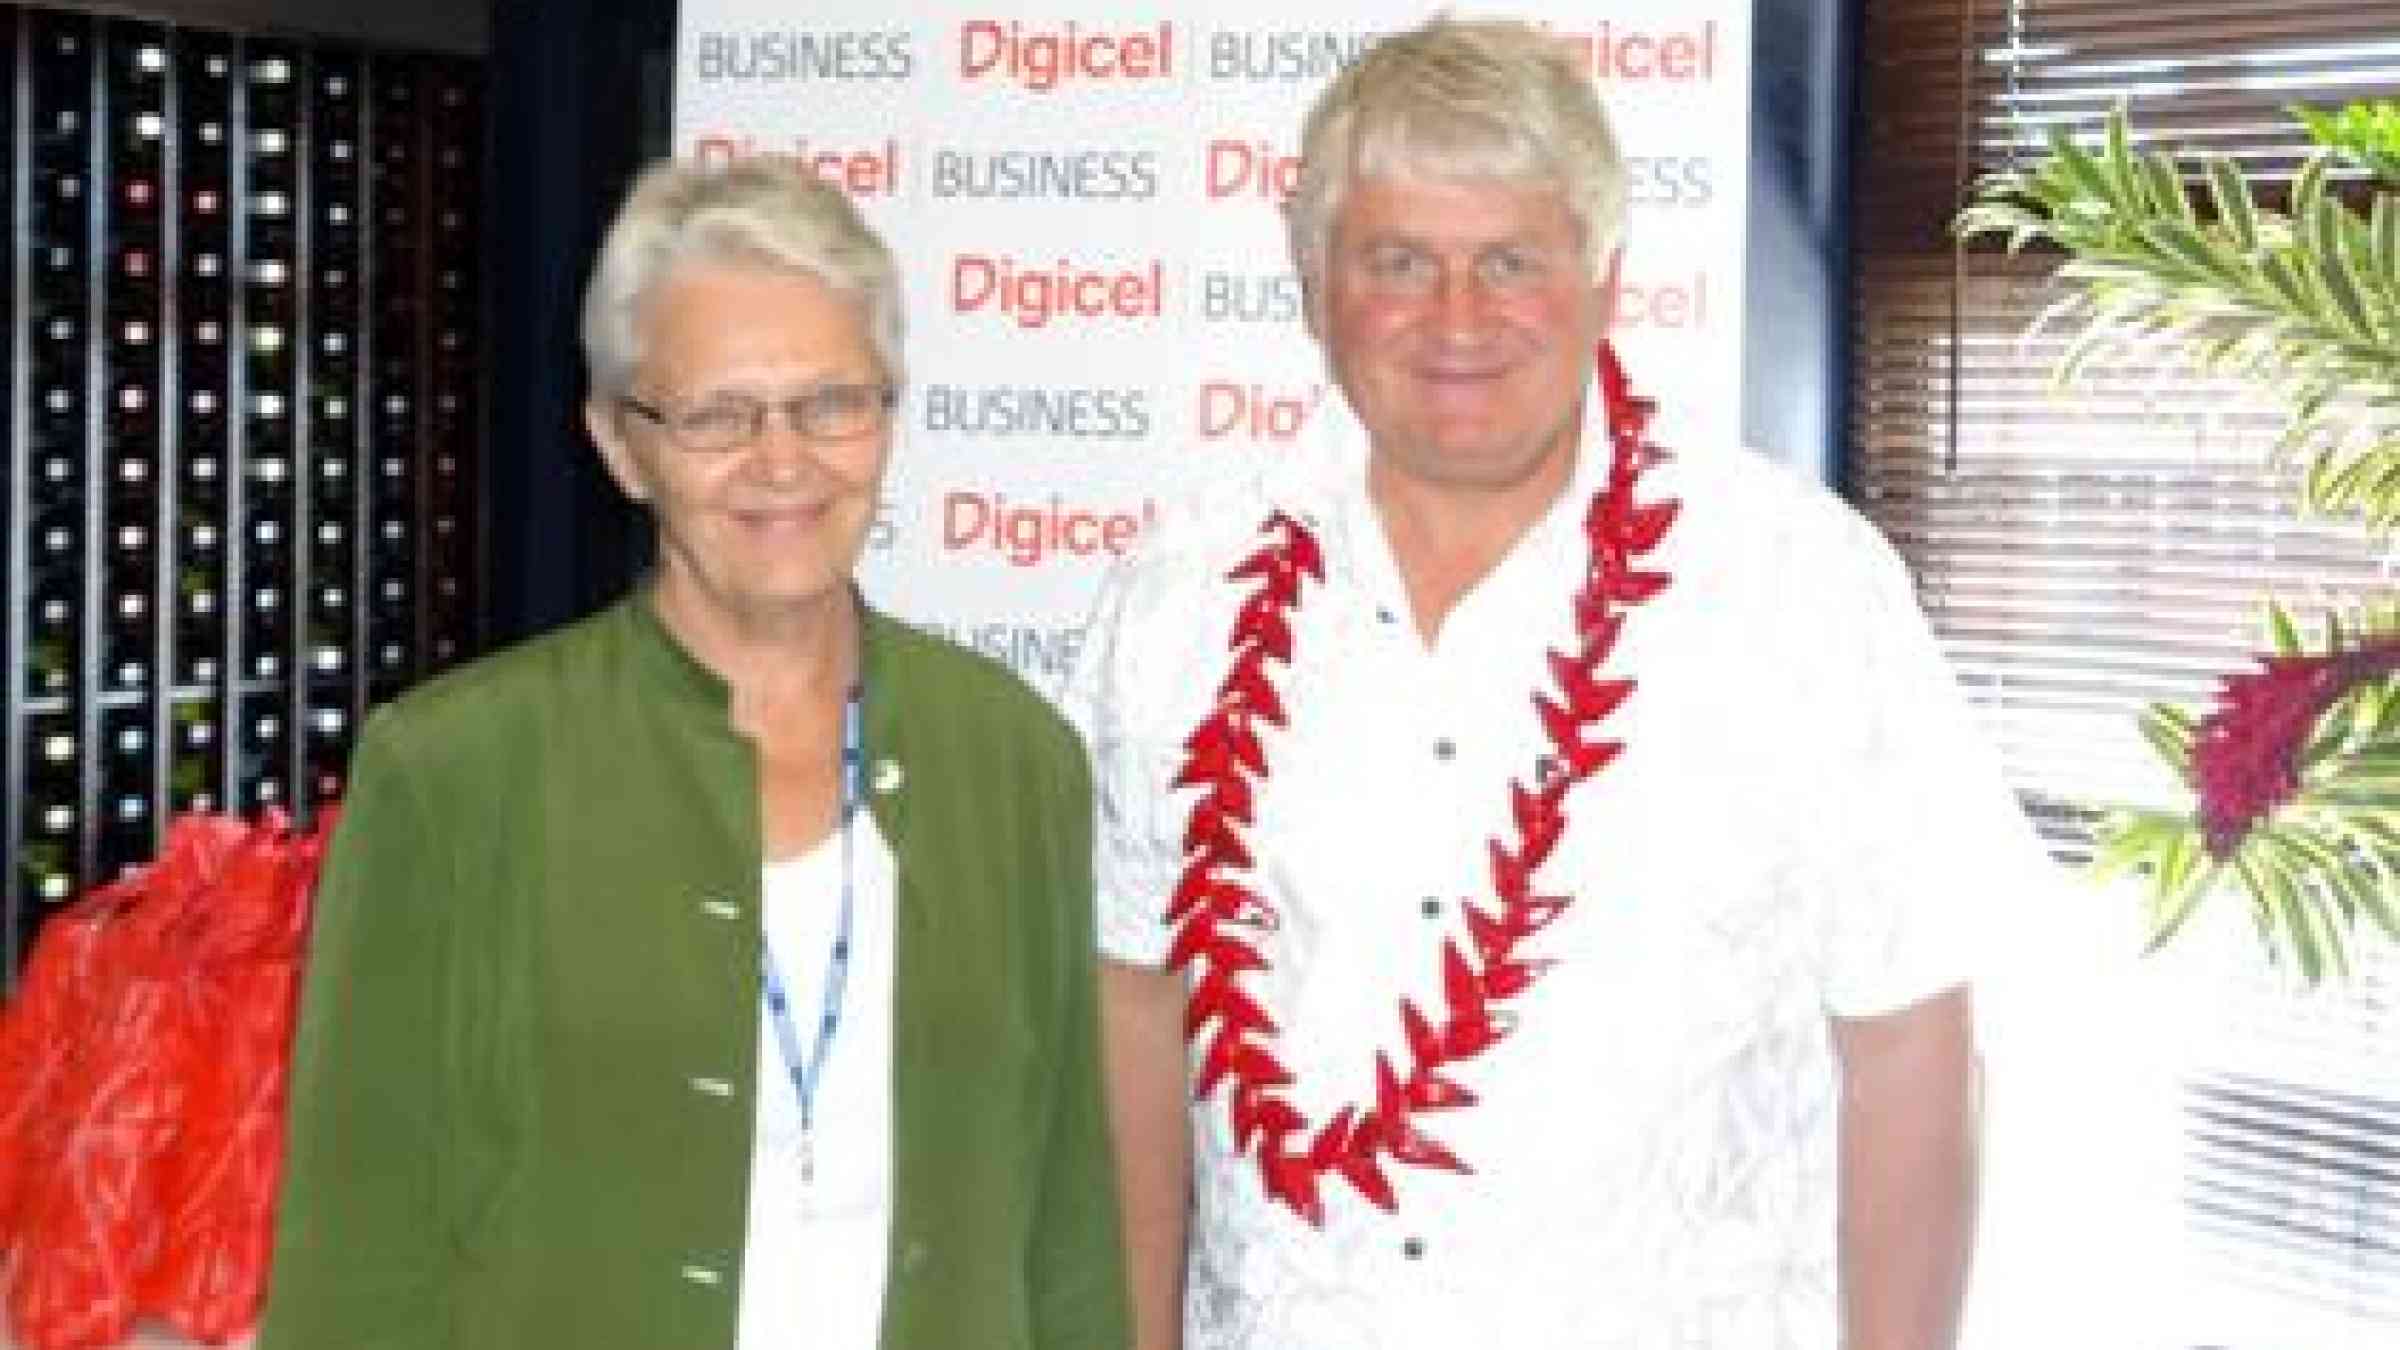 Margareta Wahlström, Head of UNISDR, with Digicel Chairman, Denis O'Brien, at the International Conference on SIDS in Samoa. (Photo: UNISDR)